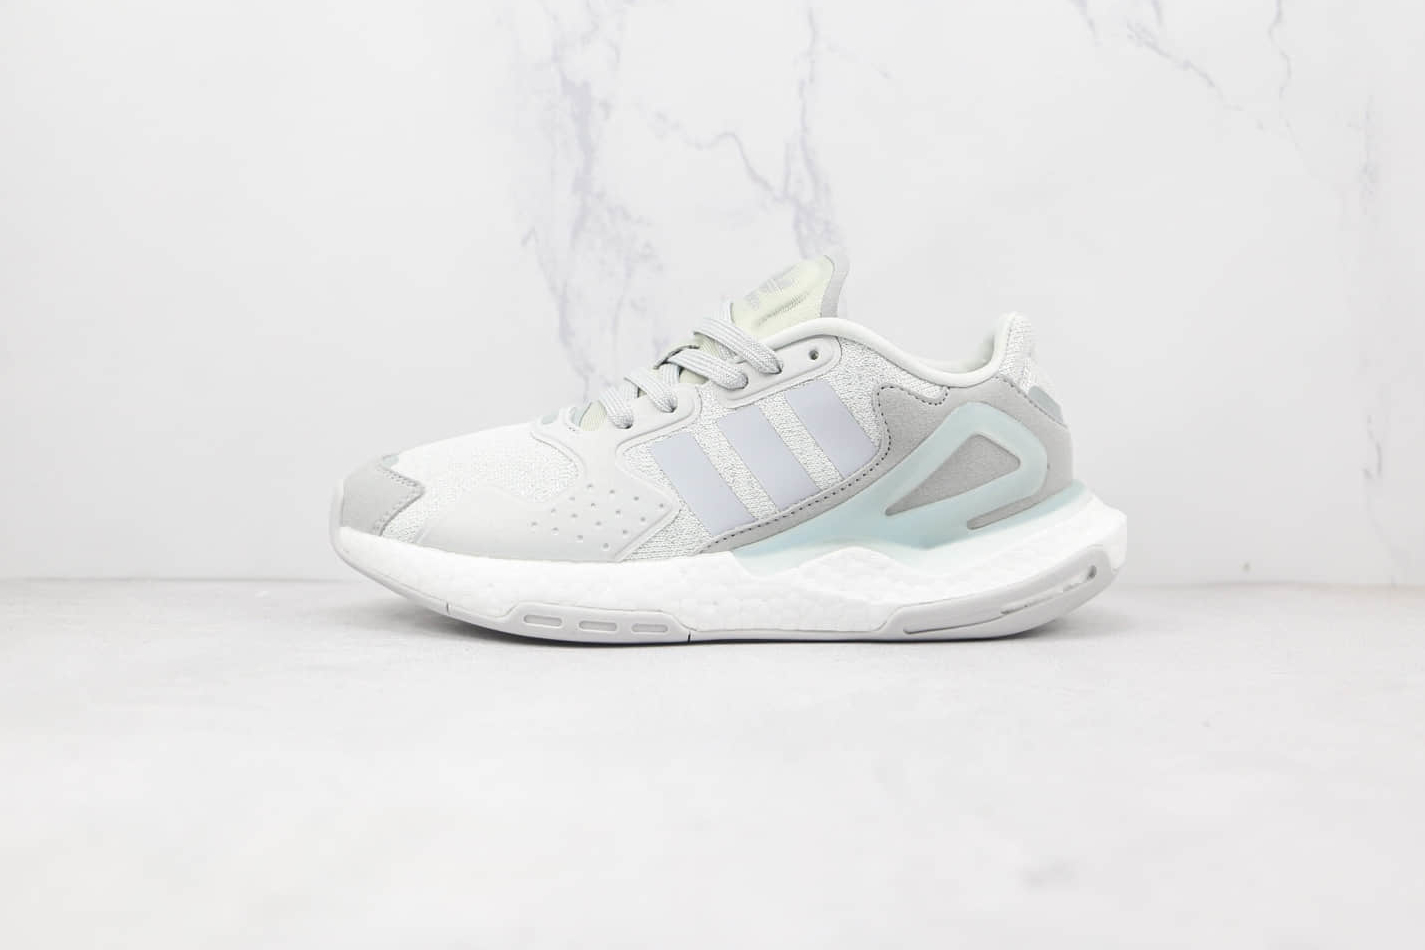 Adidas Neo Grand Court White Bahia Mint FW5901 - Trendy and Stylish Sneakers